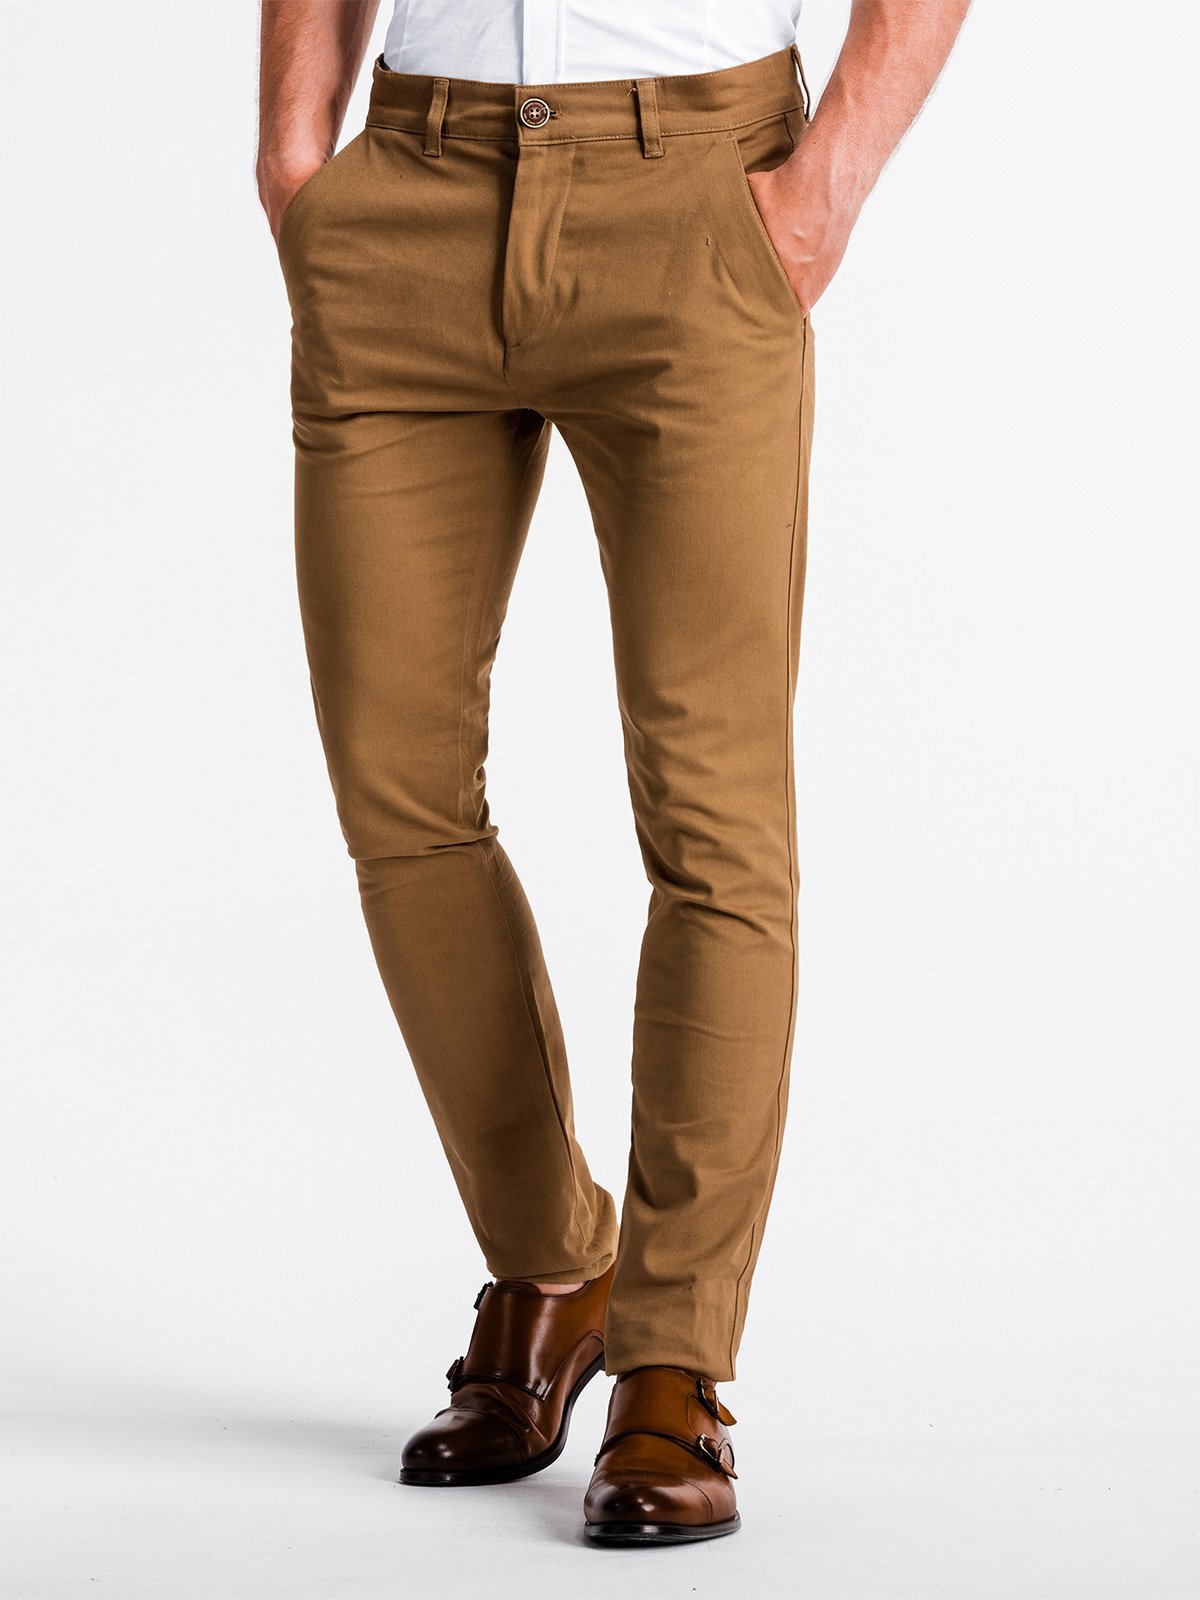 15 Trendiest Camel Pants To Wear Right Now  Styleoholic